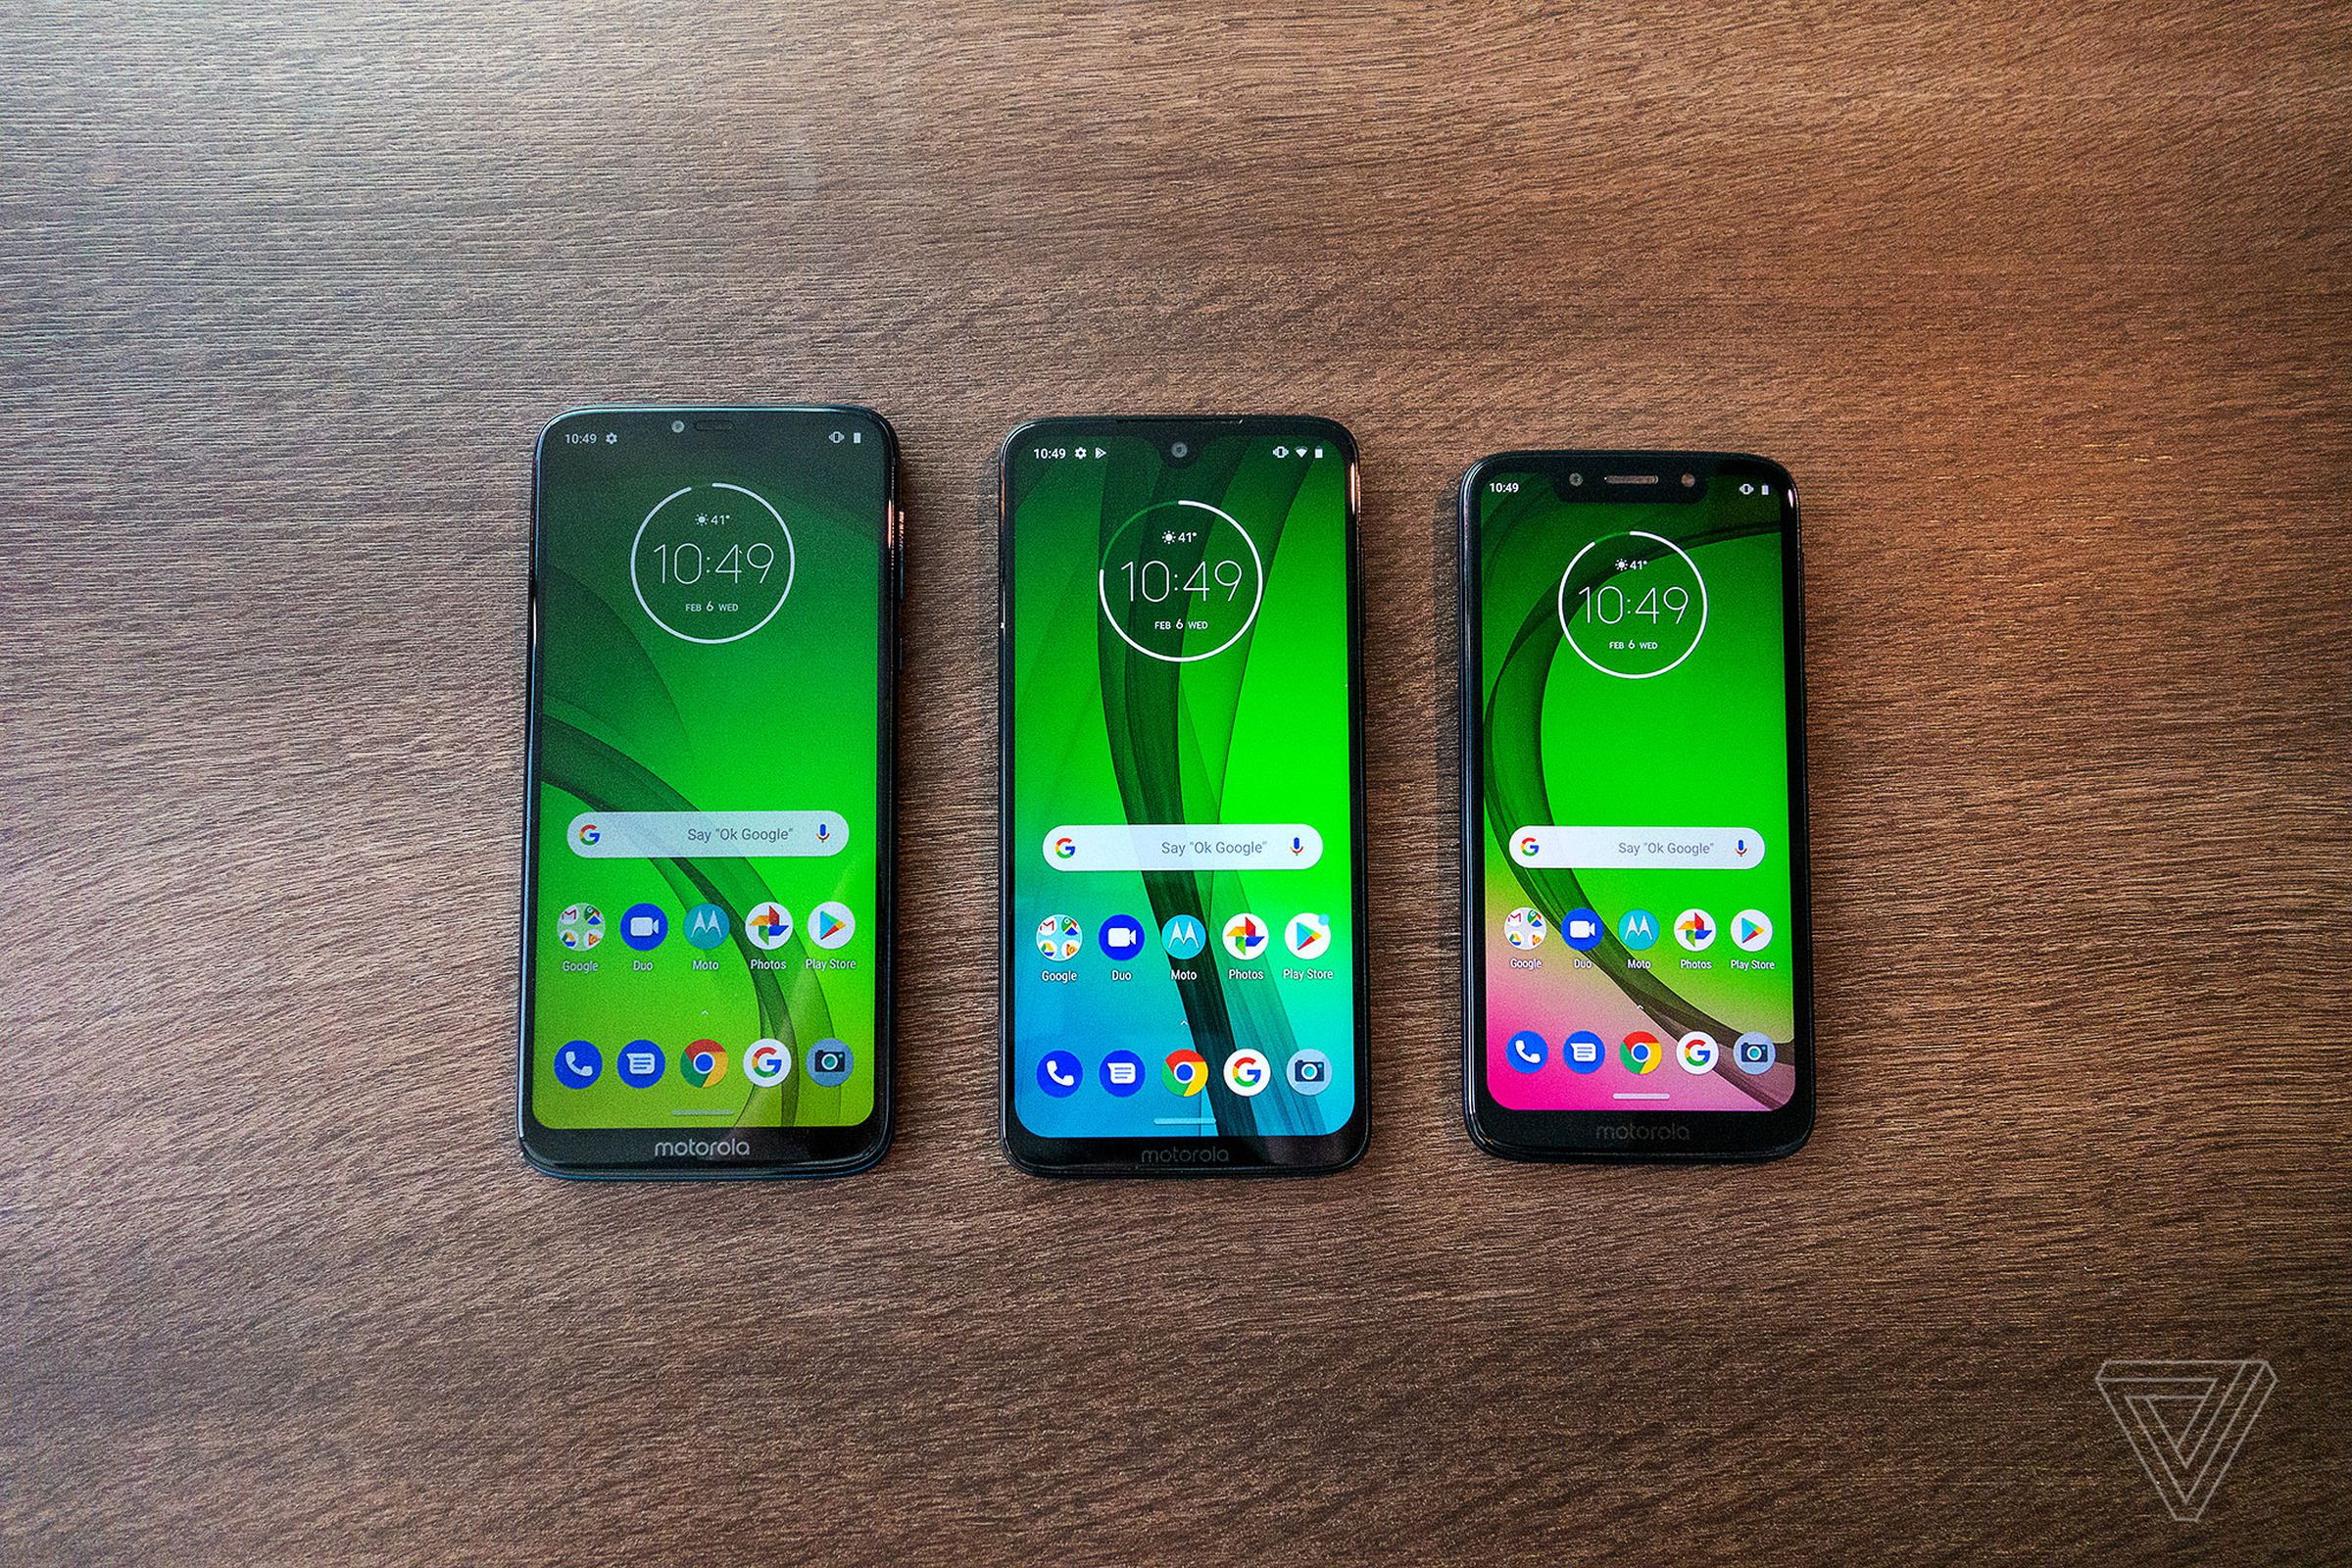 From left to right: Moto G7 Power, Moto G7, Moto G7 Play